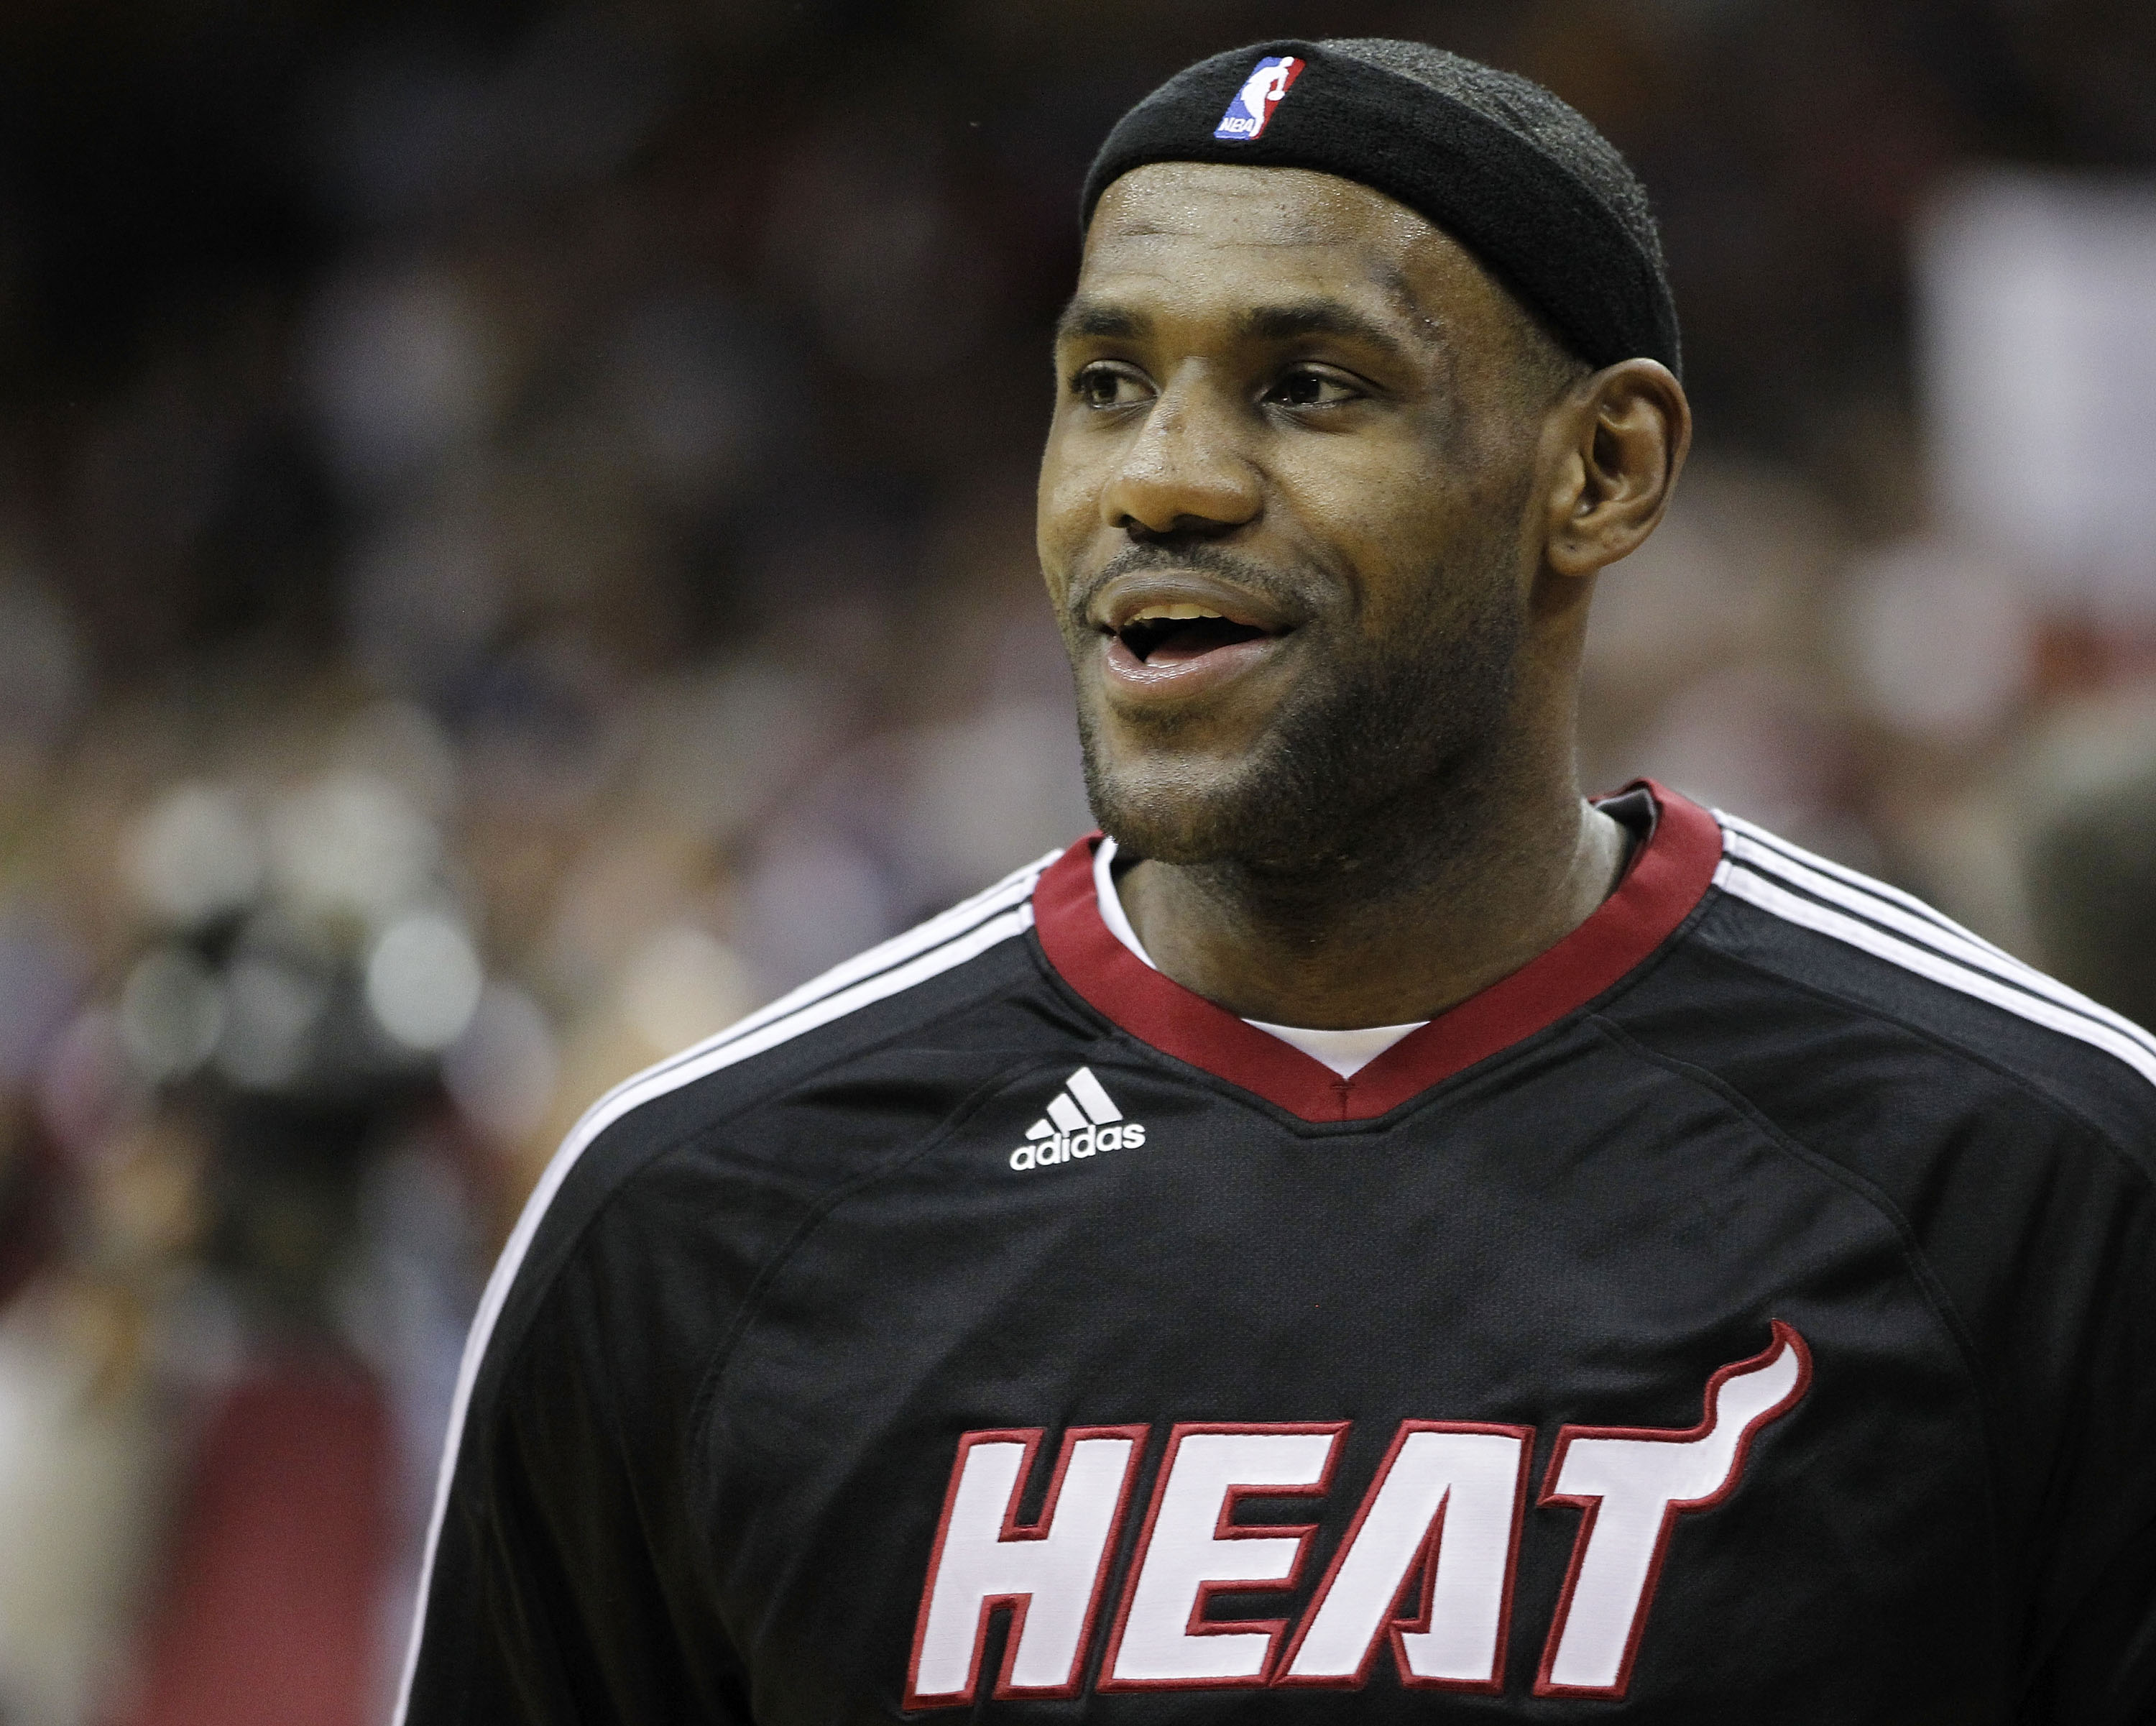 LeBron James says Heat players hate the sleeved Christmas jerseys